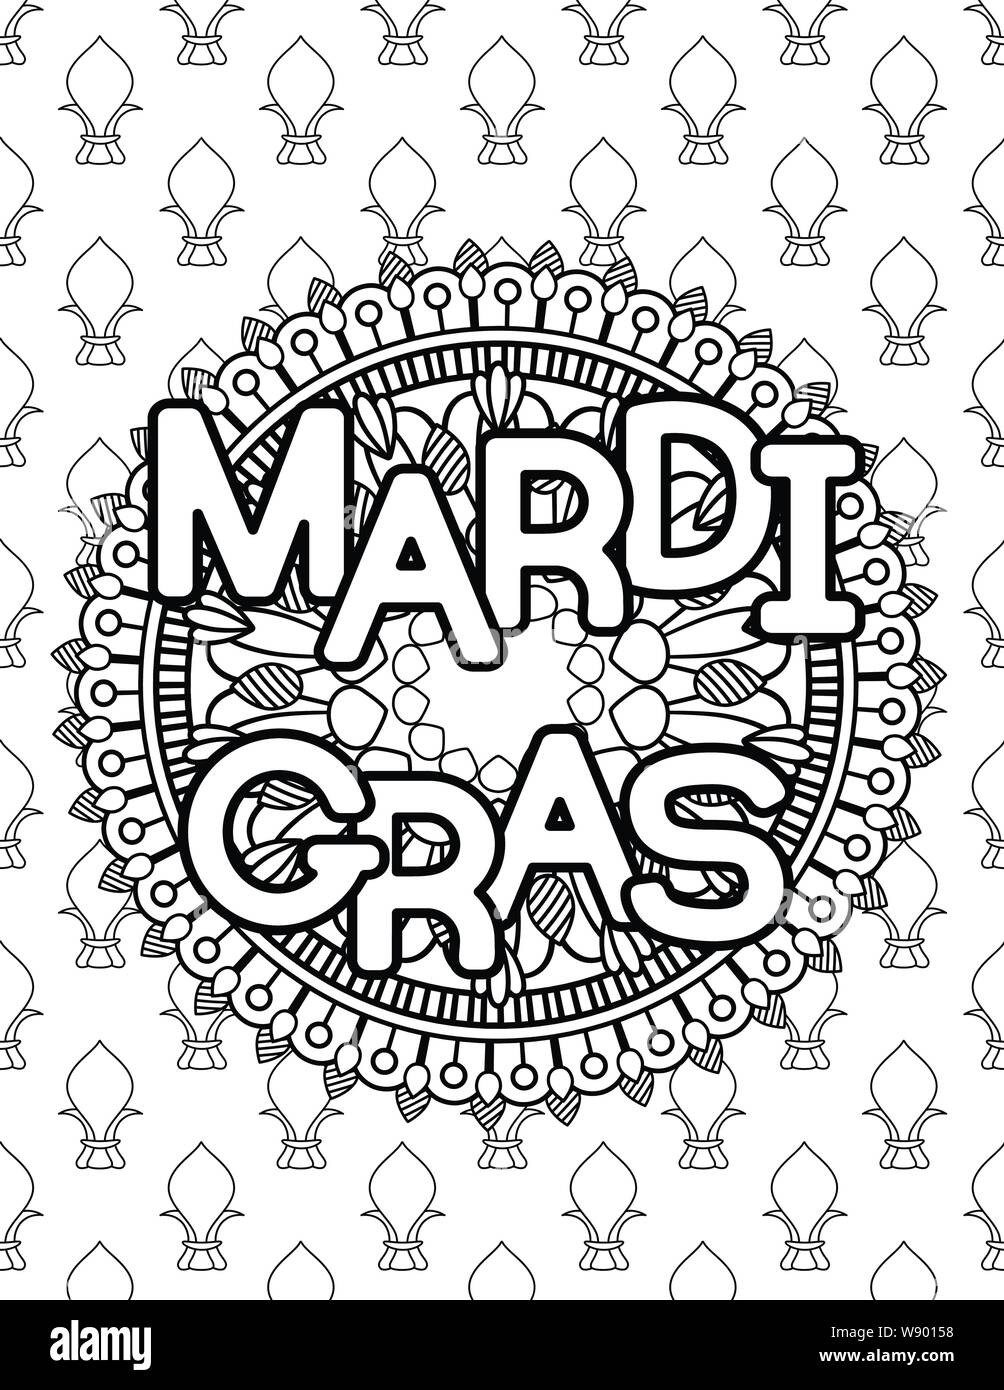 Mardi Gras or Shrove Tuesday. Coloring page for adult coloring book. Vector illustration. Stock Vector